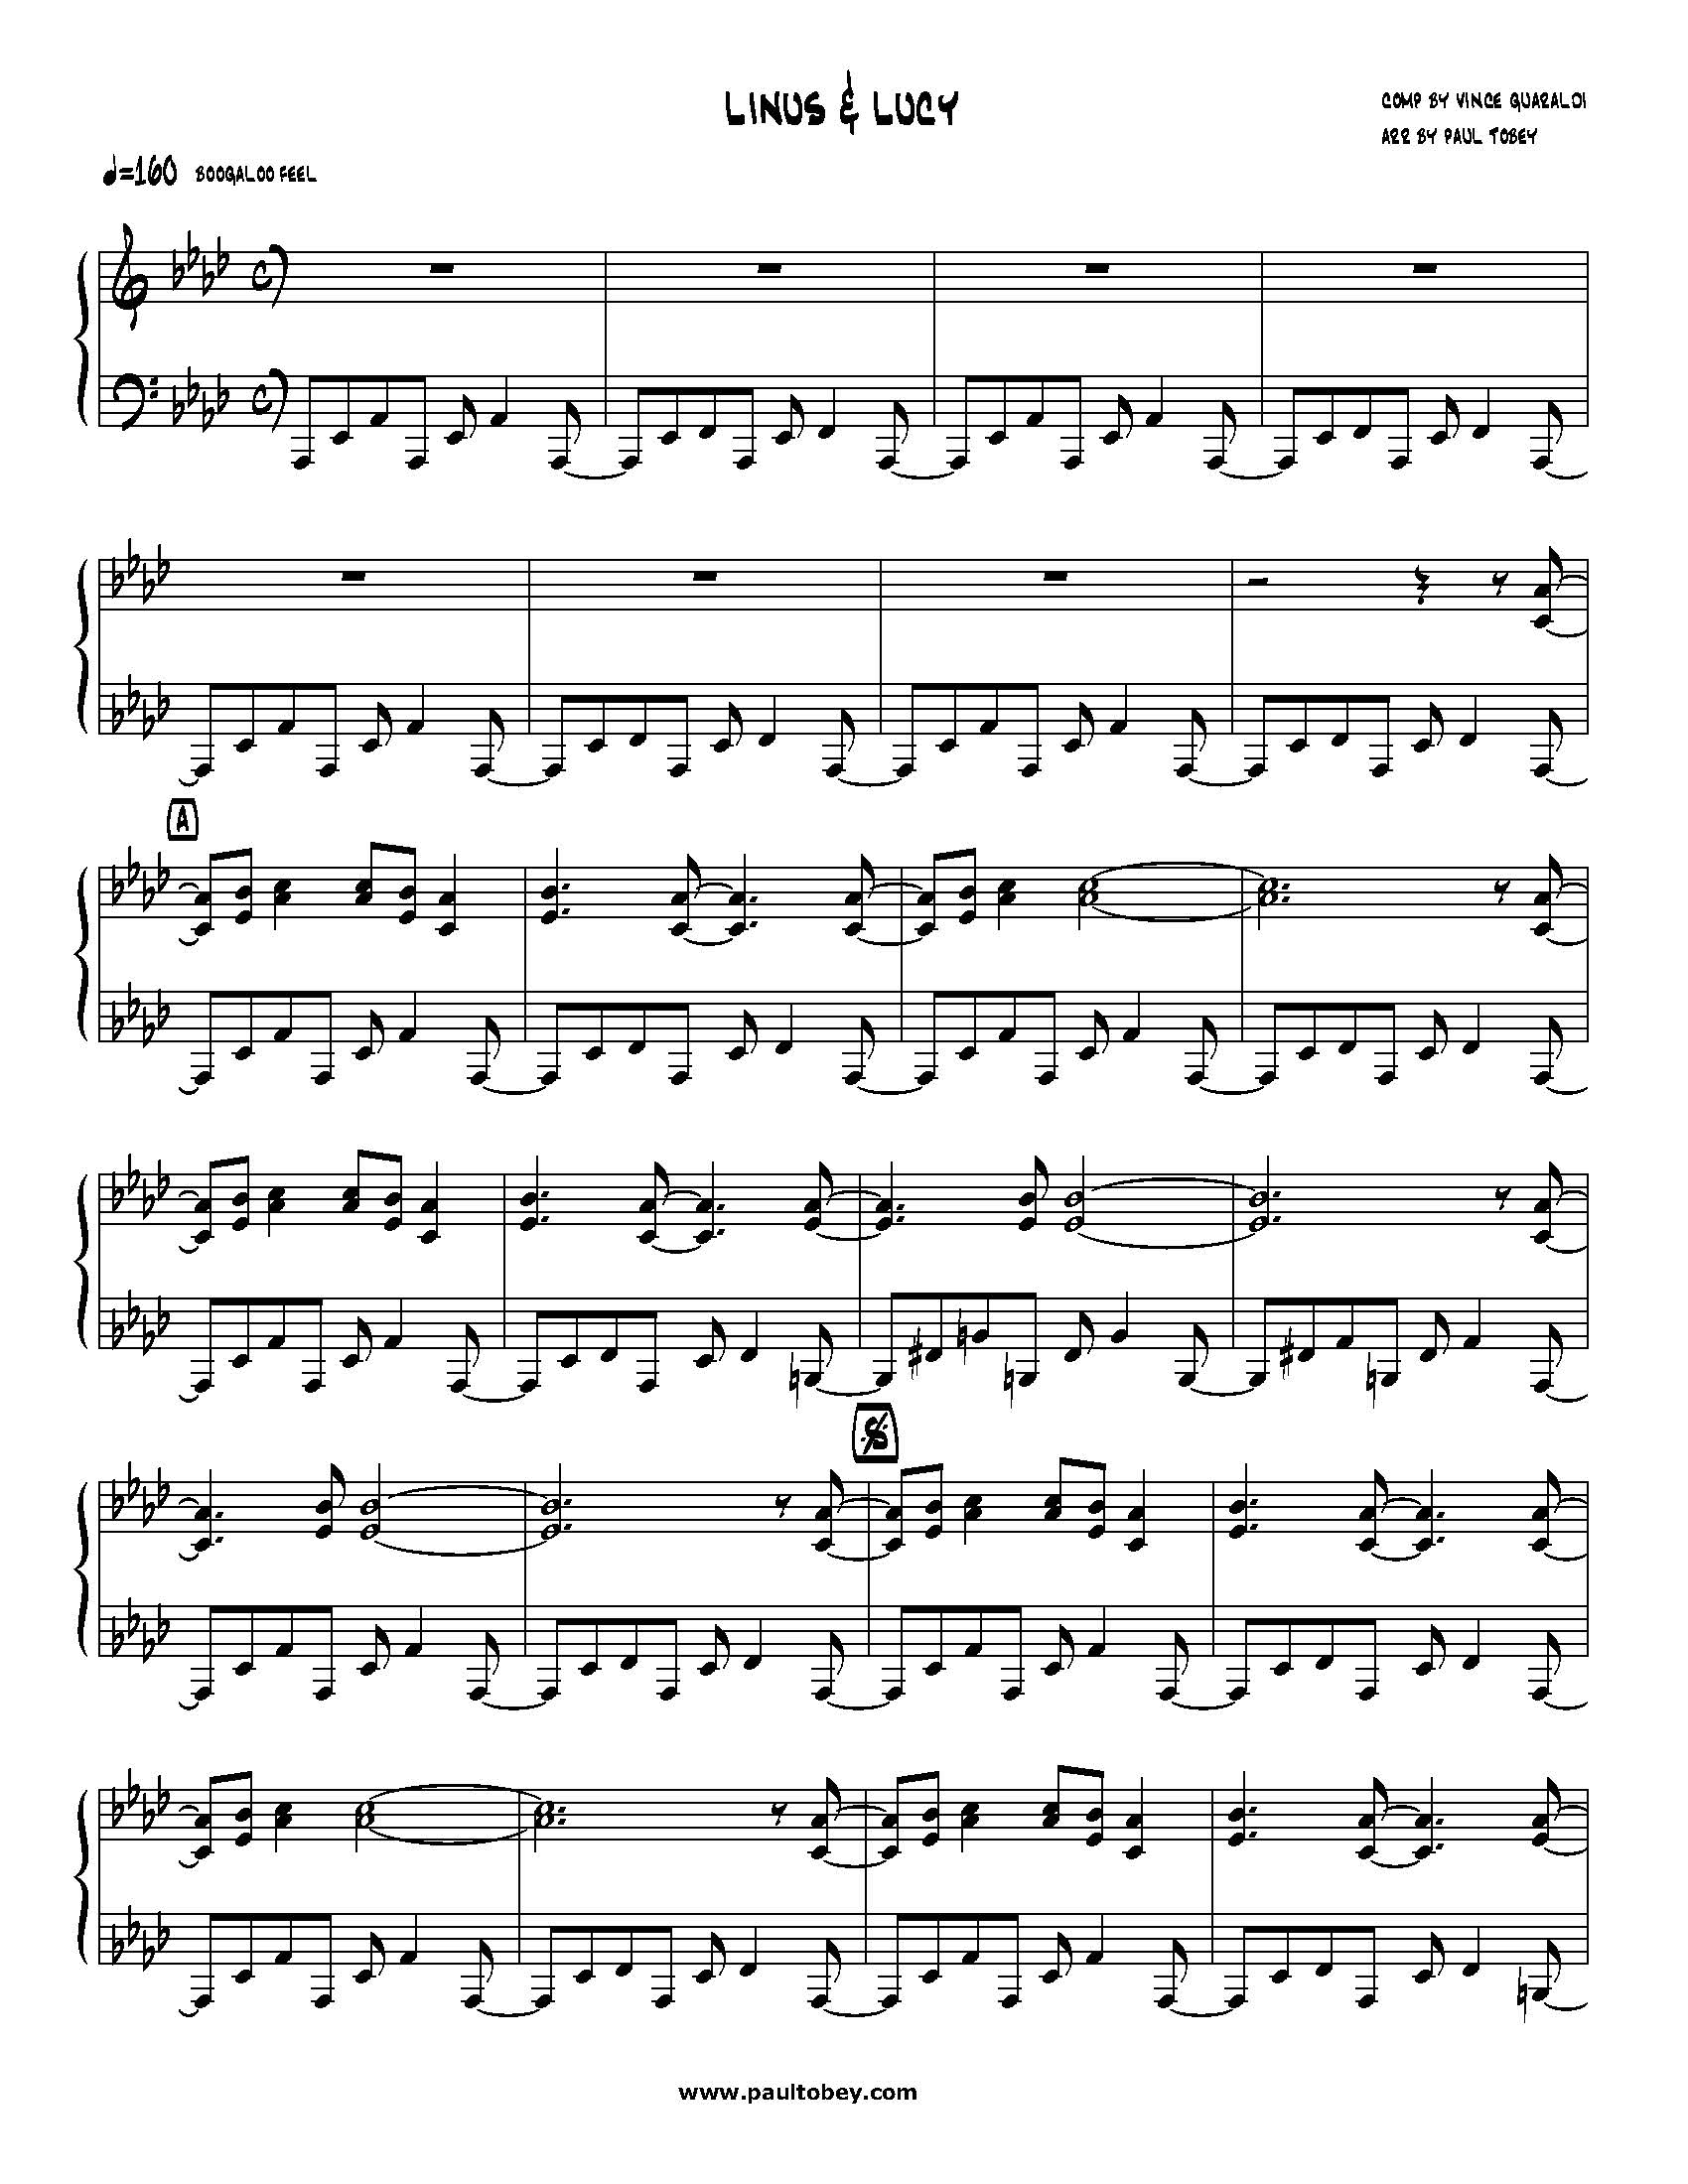 linus-and-lucy-sheet-music-pdf-paul-tobey